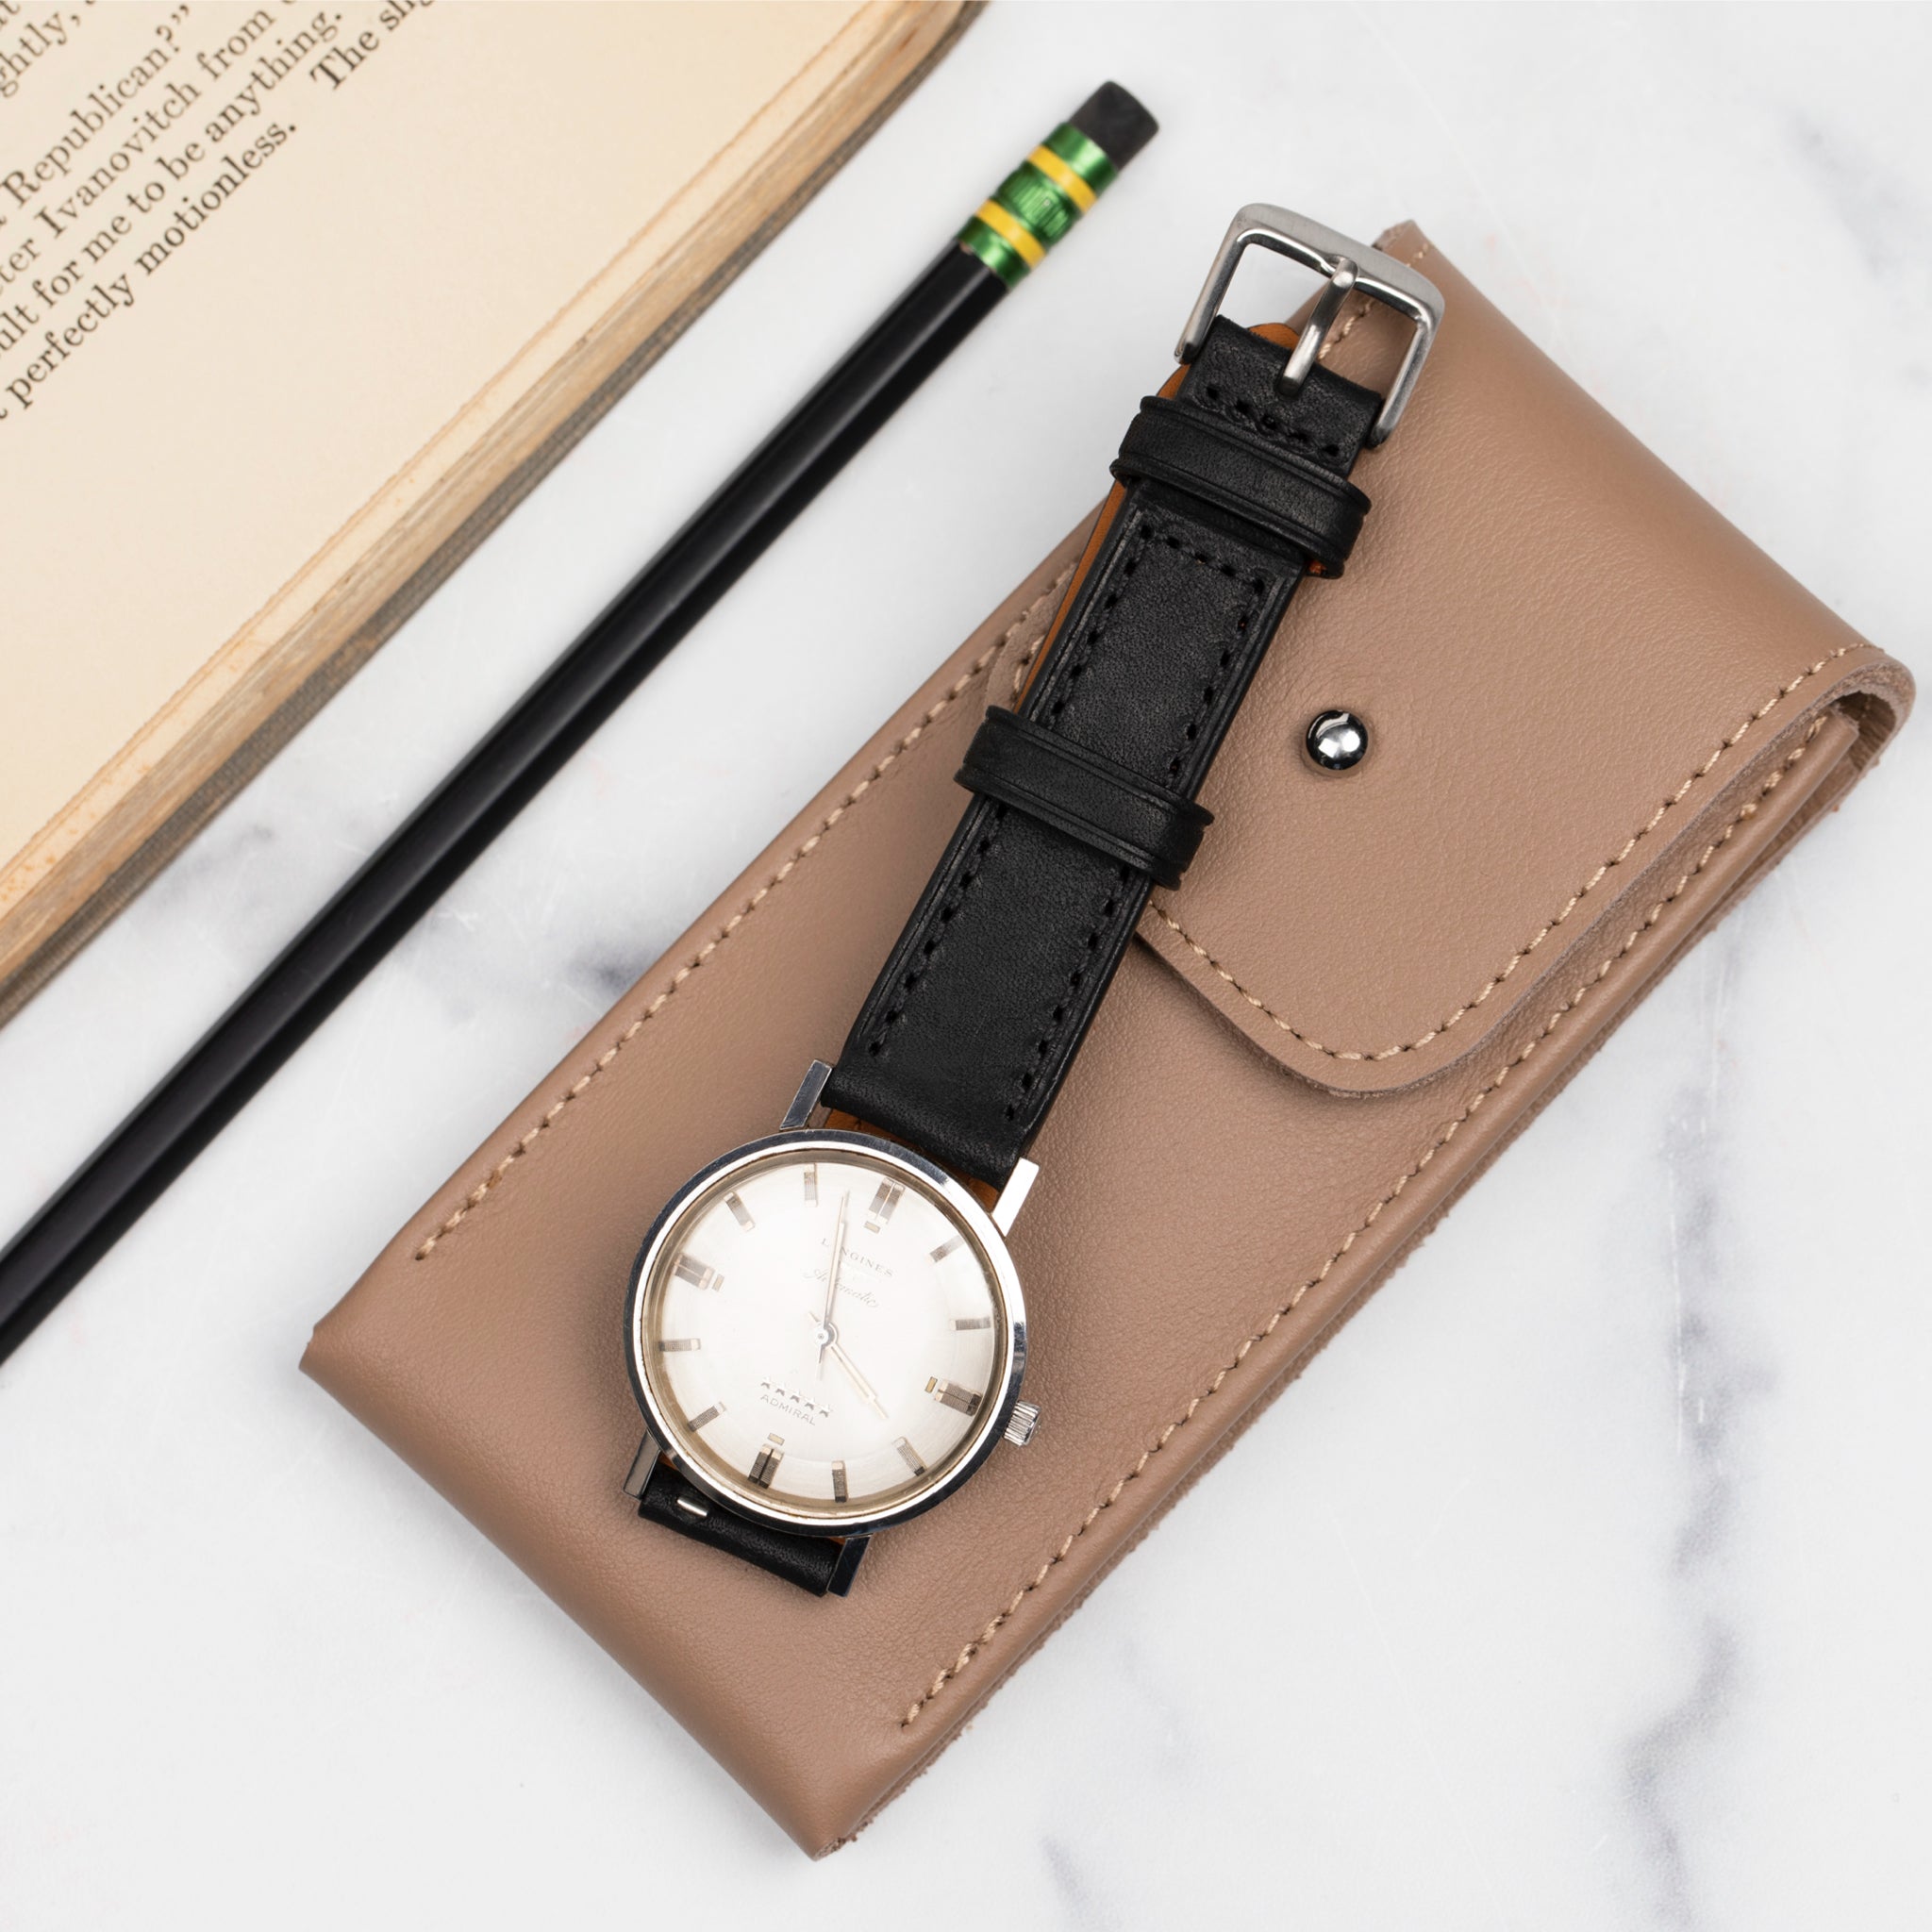 Watch Pouch & Case For Travelling - Portable Travel Watch Cases - Travel  Watch Bag and Storage - Italian Leather Pouch - Watch Holder & Accessory  Organizer for … | Unique pouch, Leather pouch, Pouch